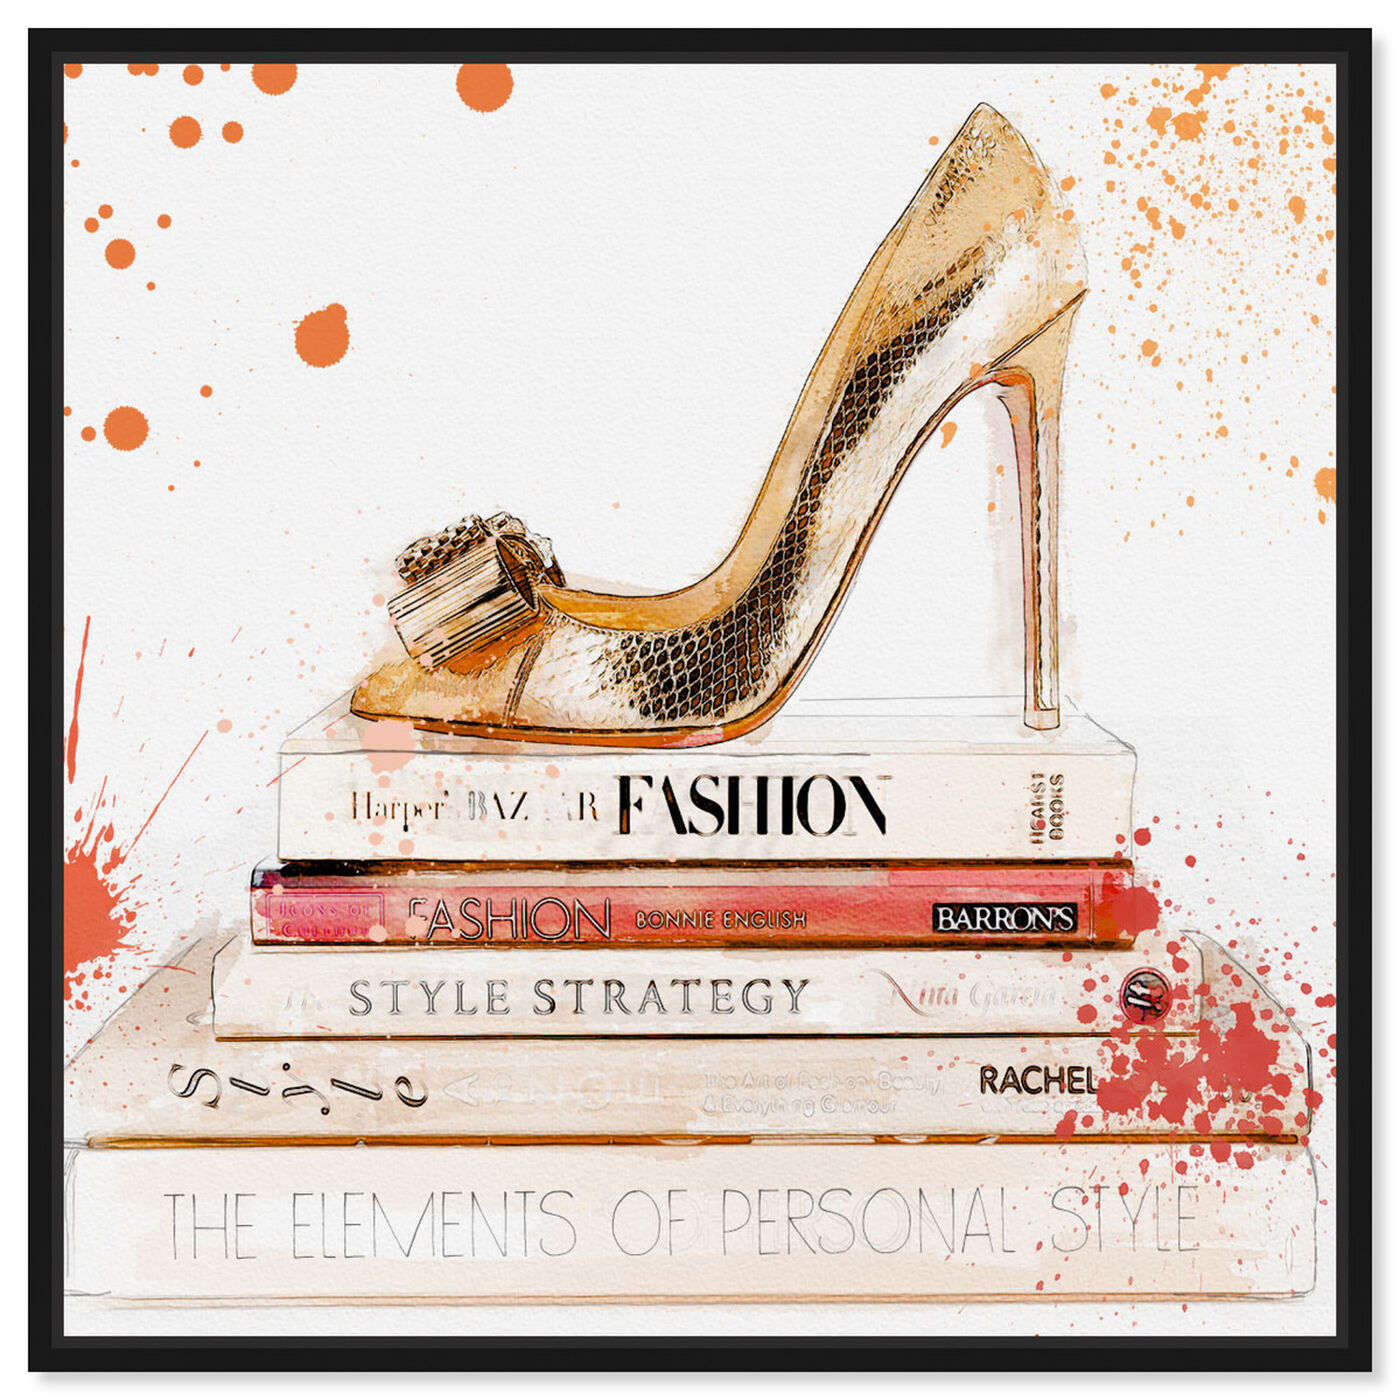 Front view of Coral Shoe and Books featuring fashion and glam and shoes art.